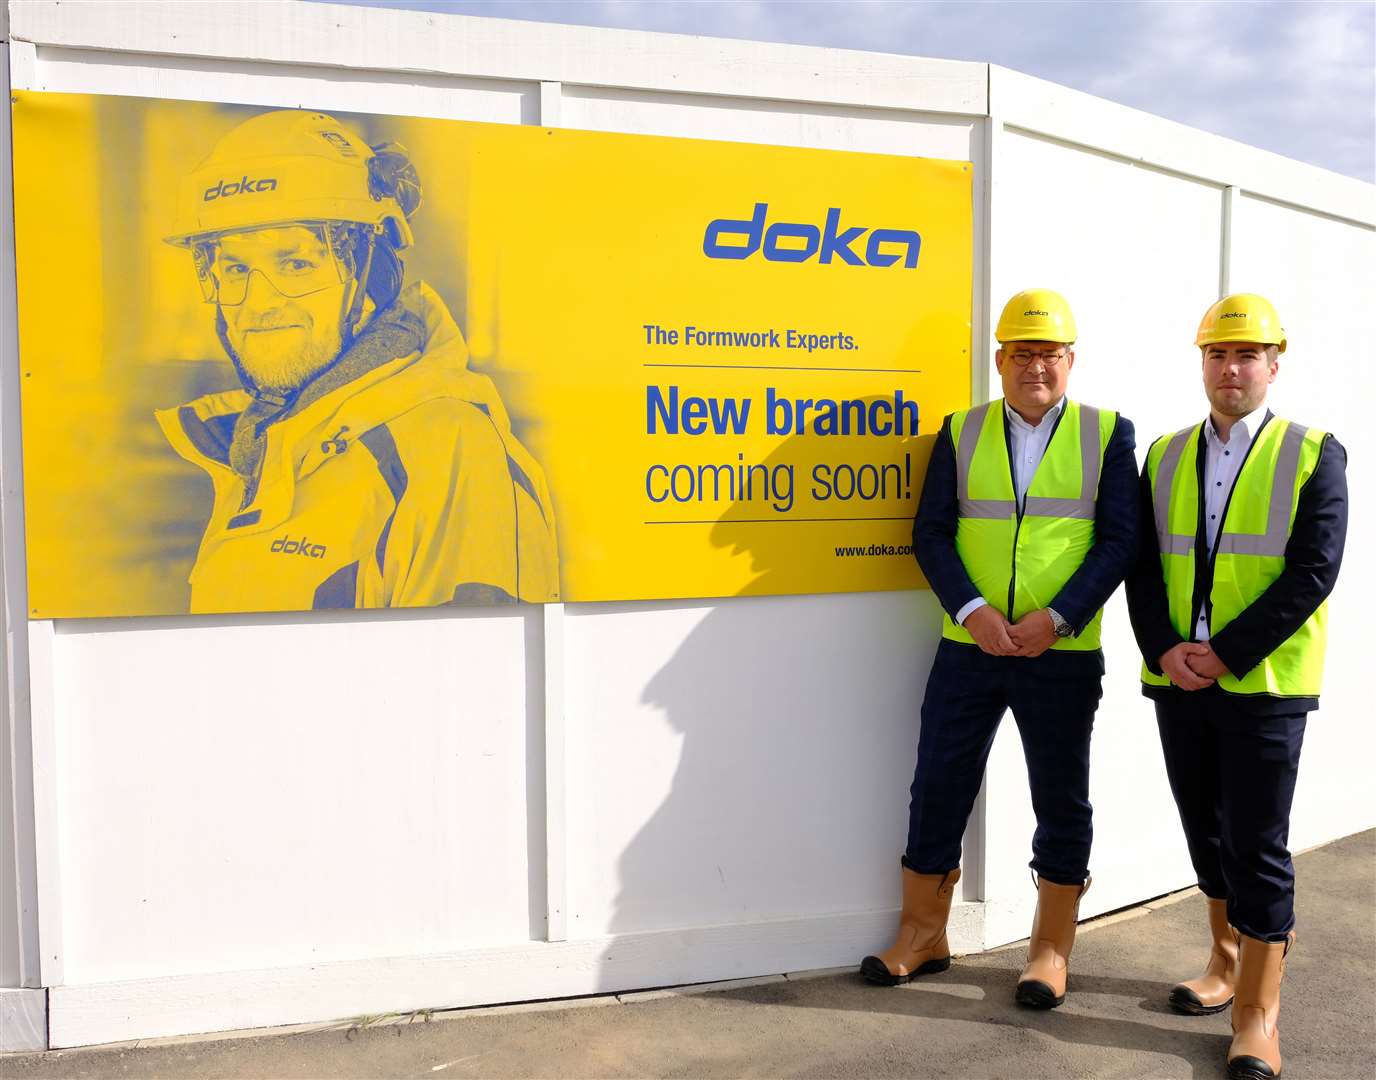 Doka's UK MD Hennie Roebroeks and project manager Jan Radlbauer at the new site in Sittingbourne